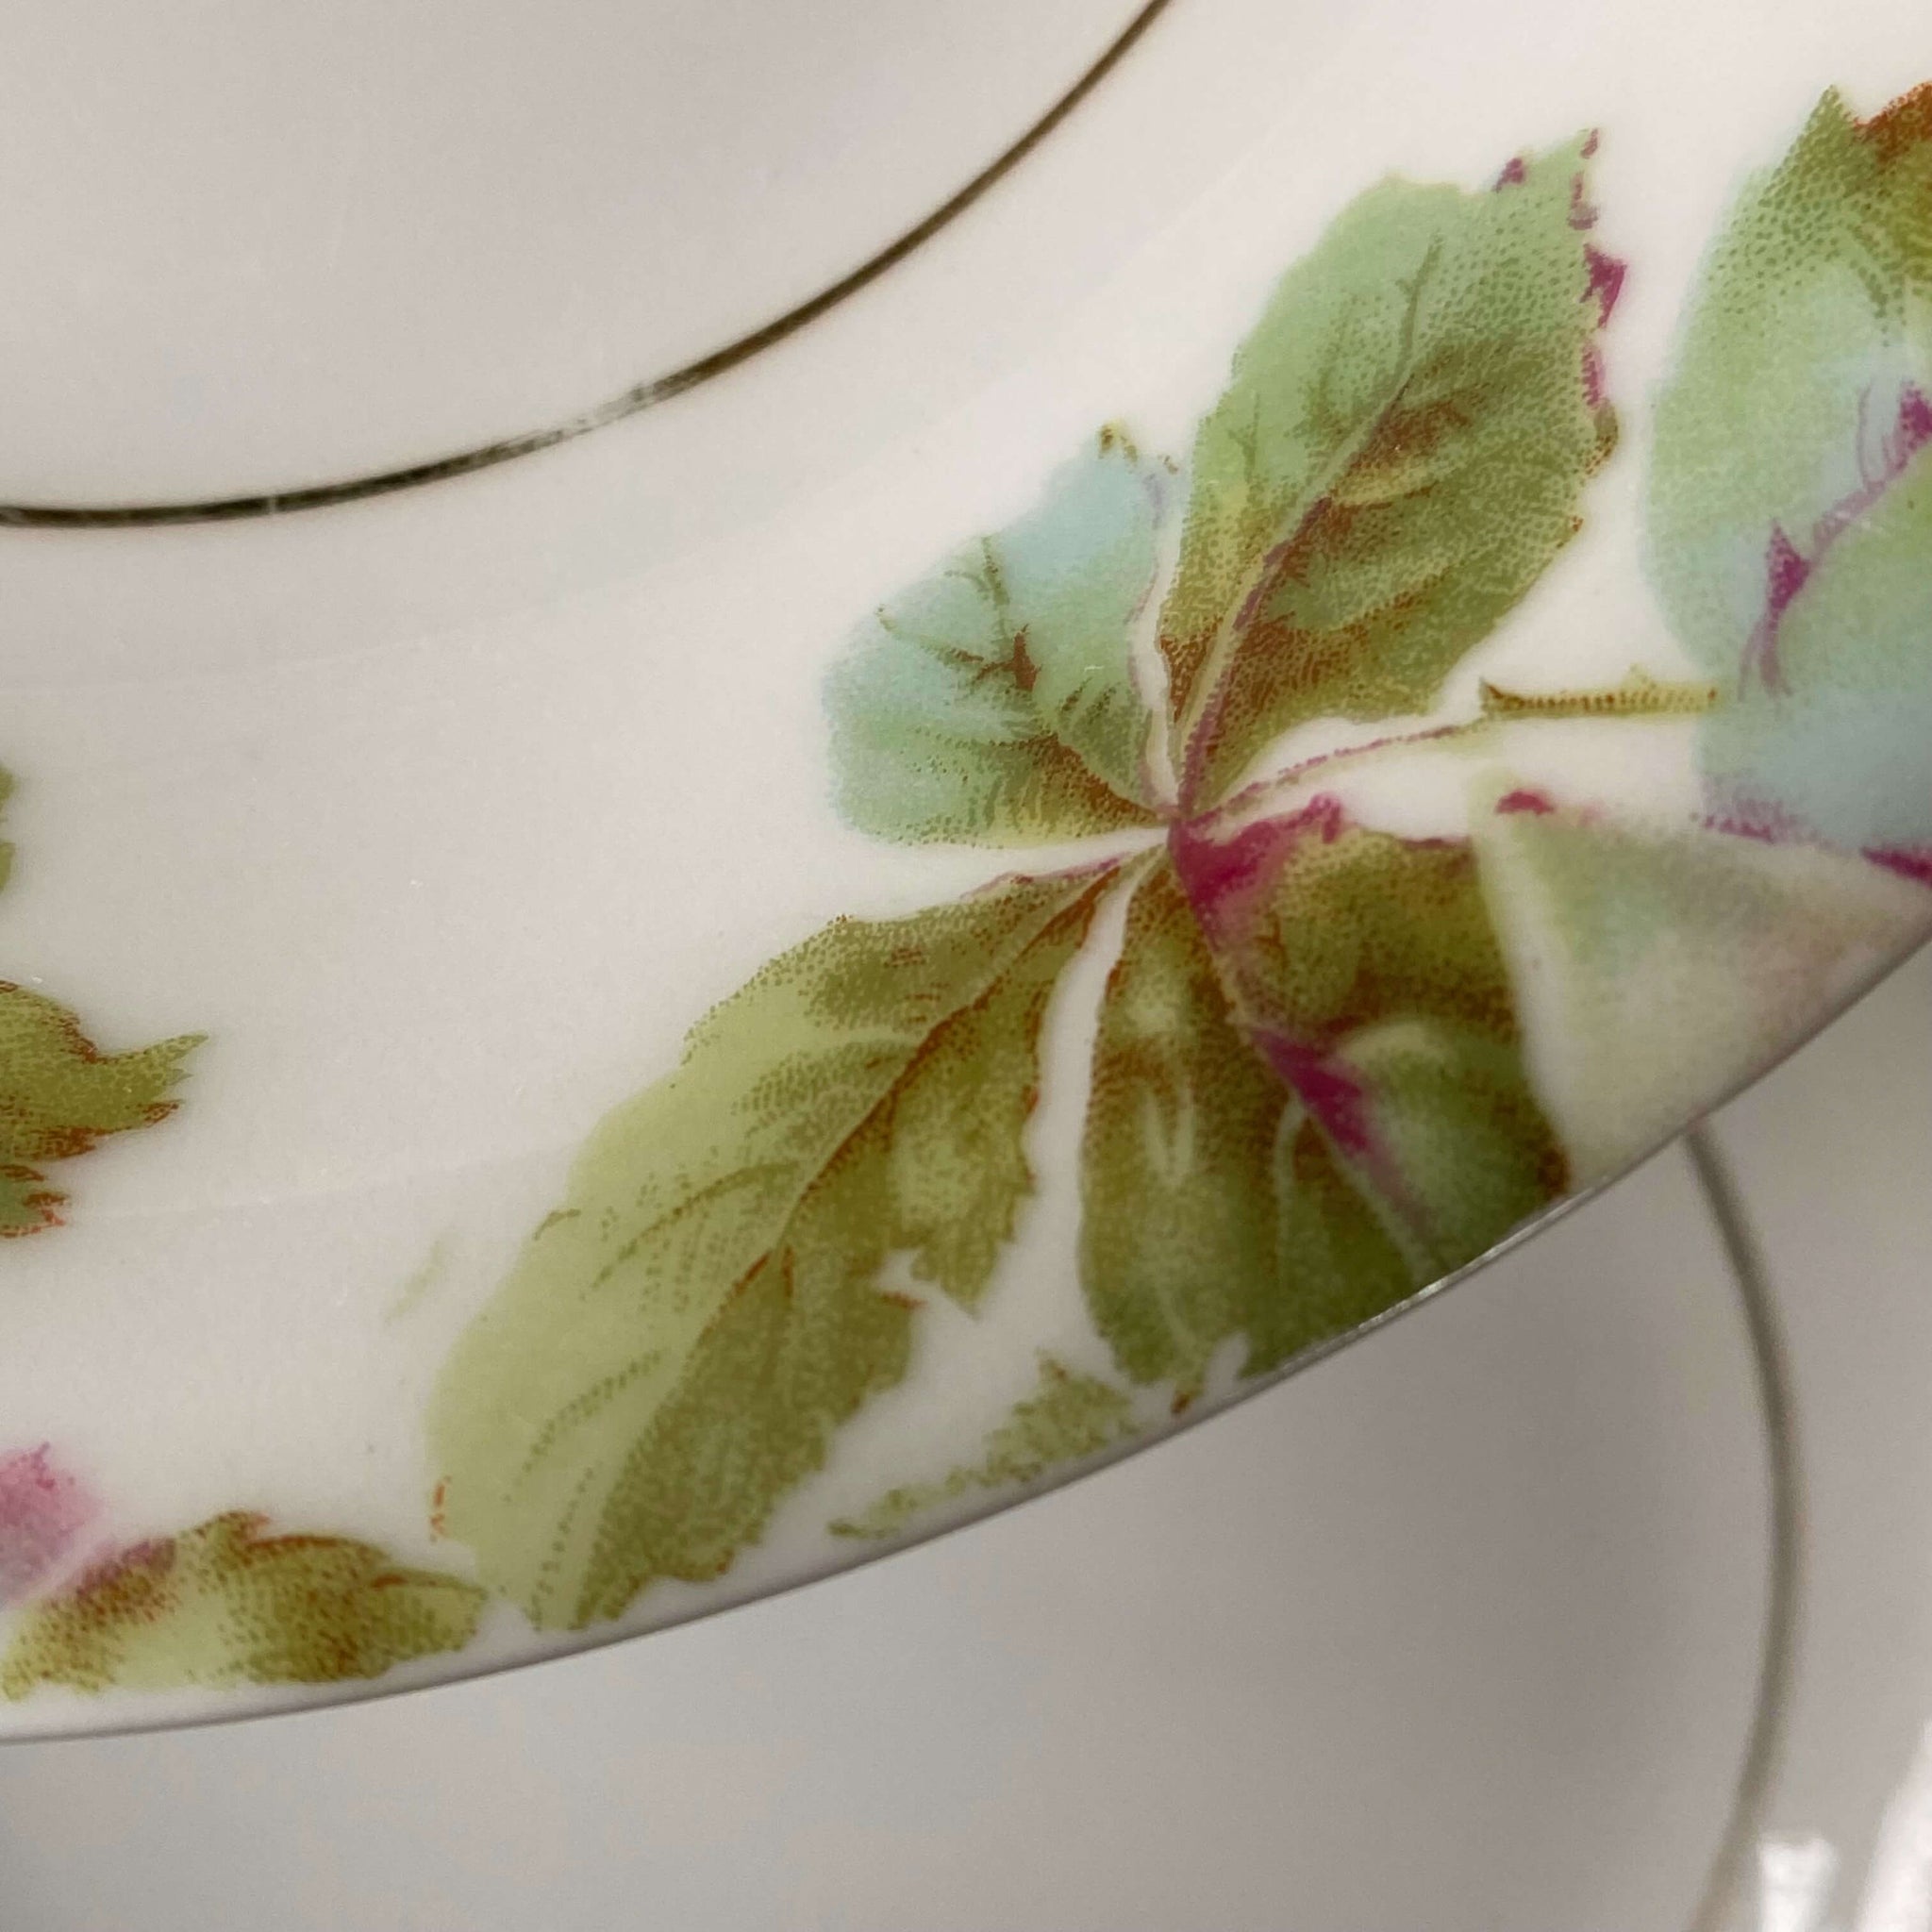 Antique German Porcelain Berry Bowls - Hermann Ohme circa 1900-1920s - Nine Available - Sold Individually